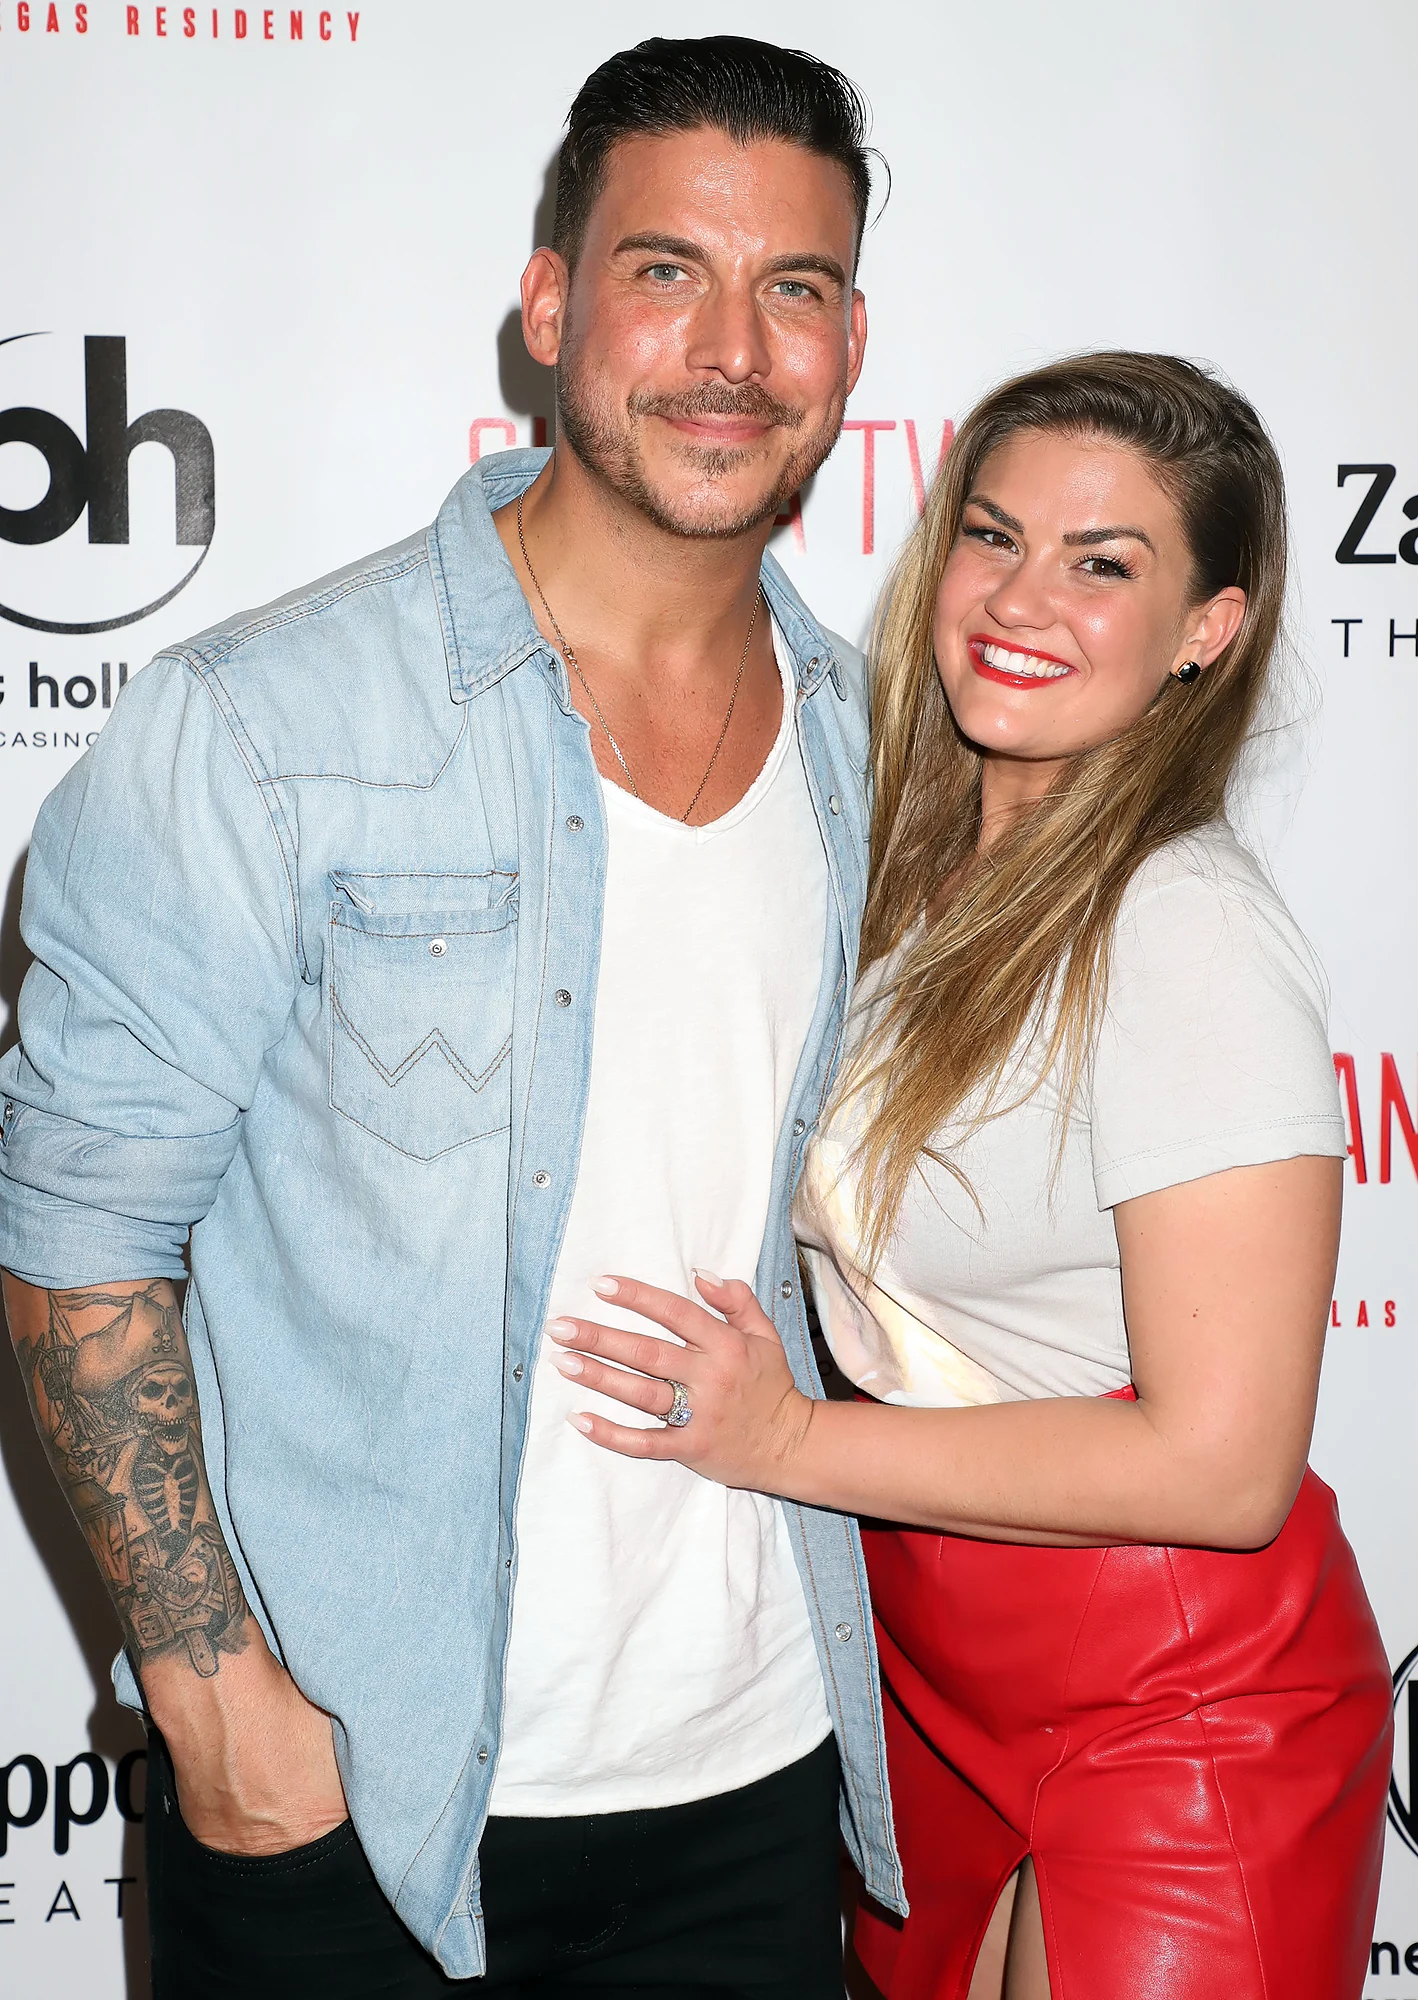 Jax Taylor & Brittany Cartwright Criticized Ahead of Charity Club Appearance